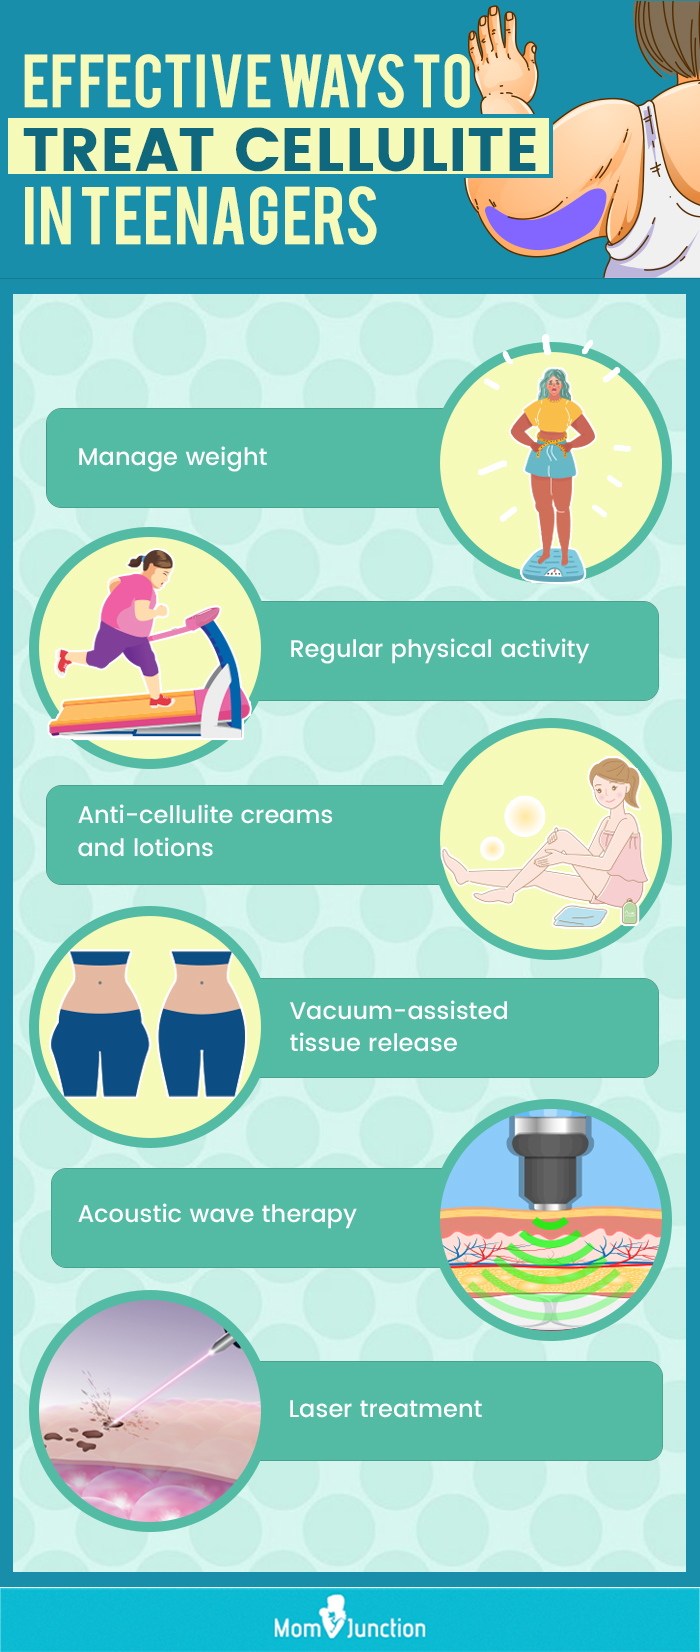 effective ways to treat cellulite in teenagers (infographic)